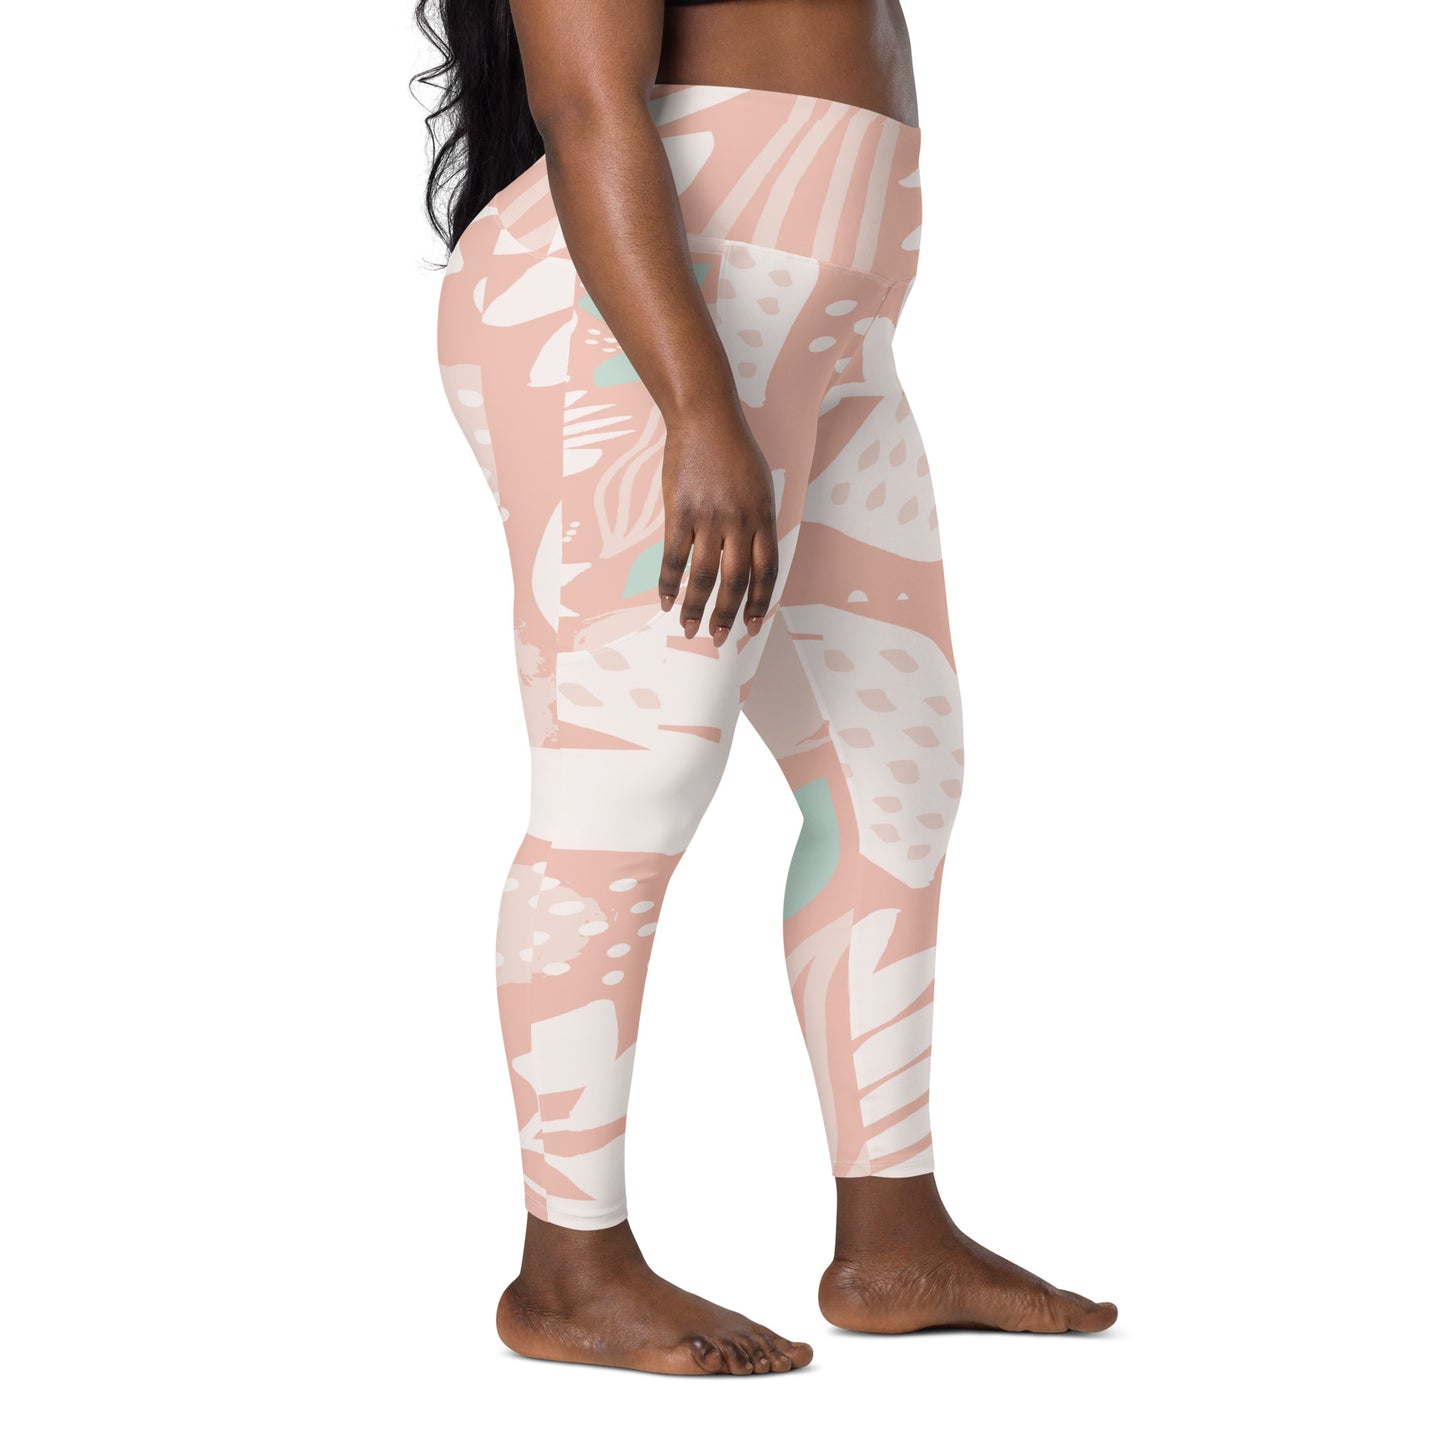 FYD High Waist Recycled Leggings with pockets in peach spring floral